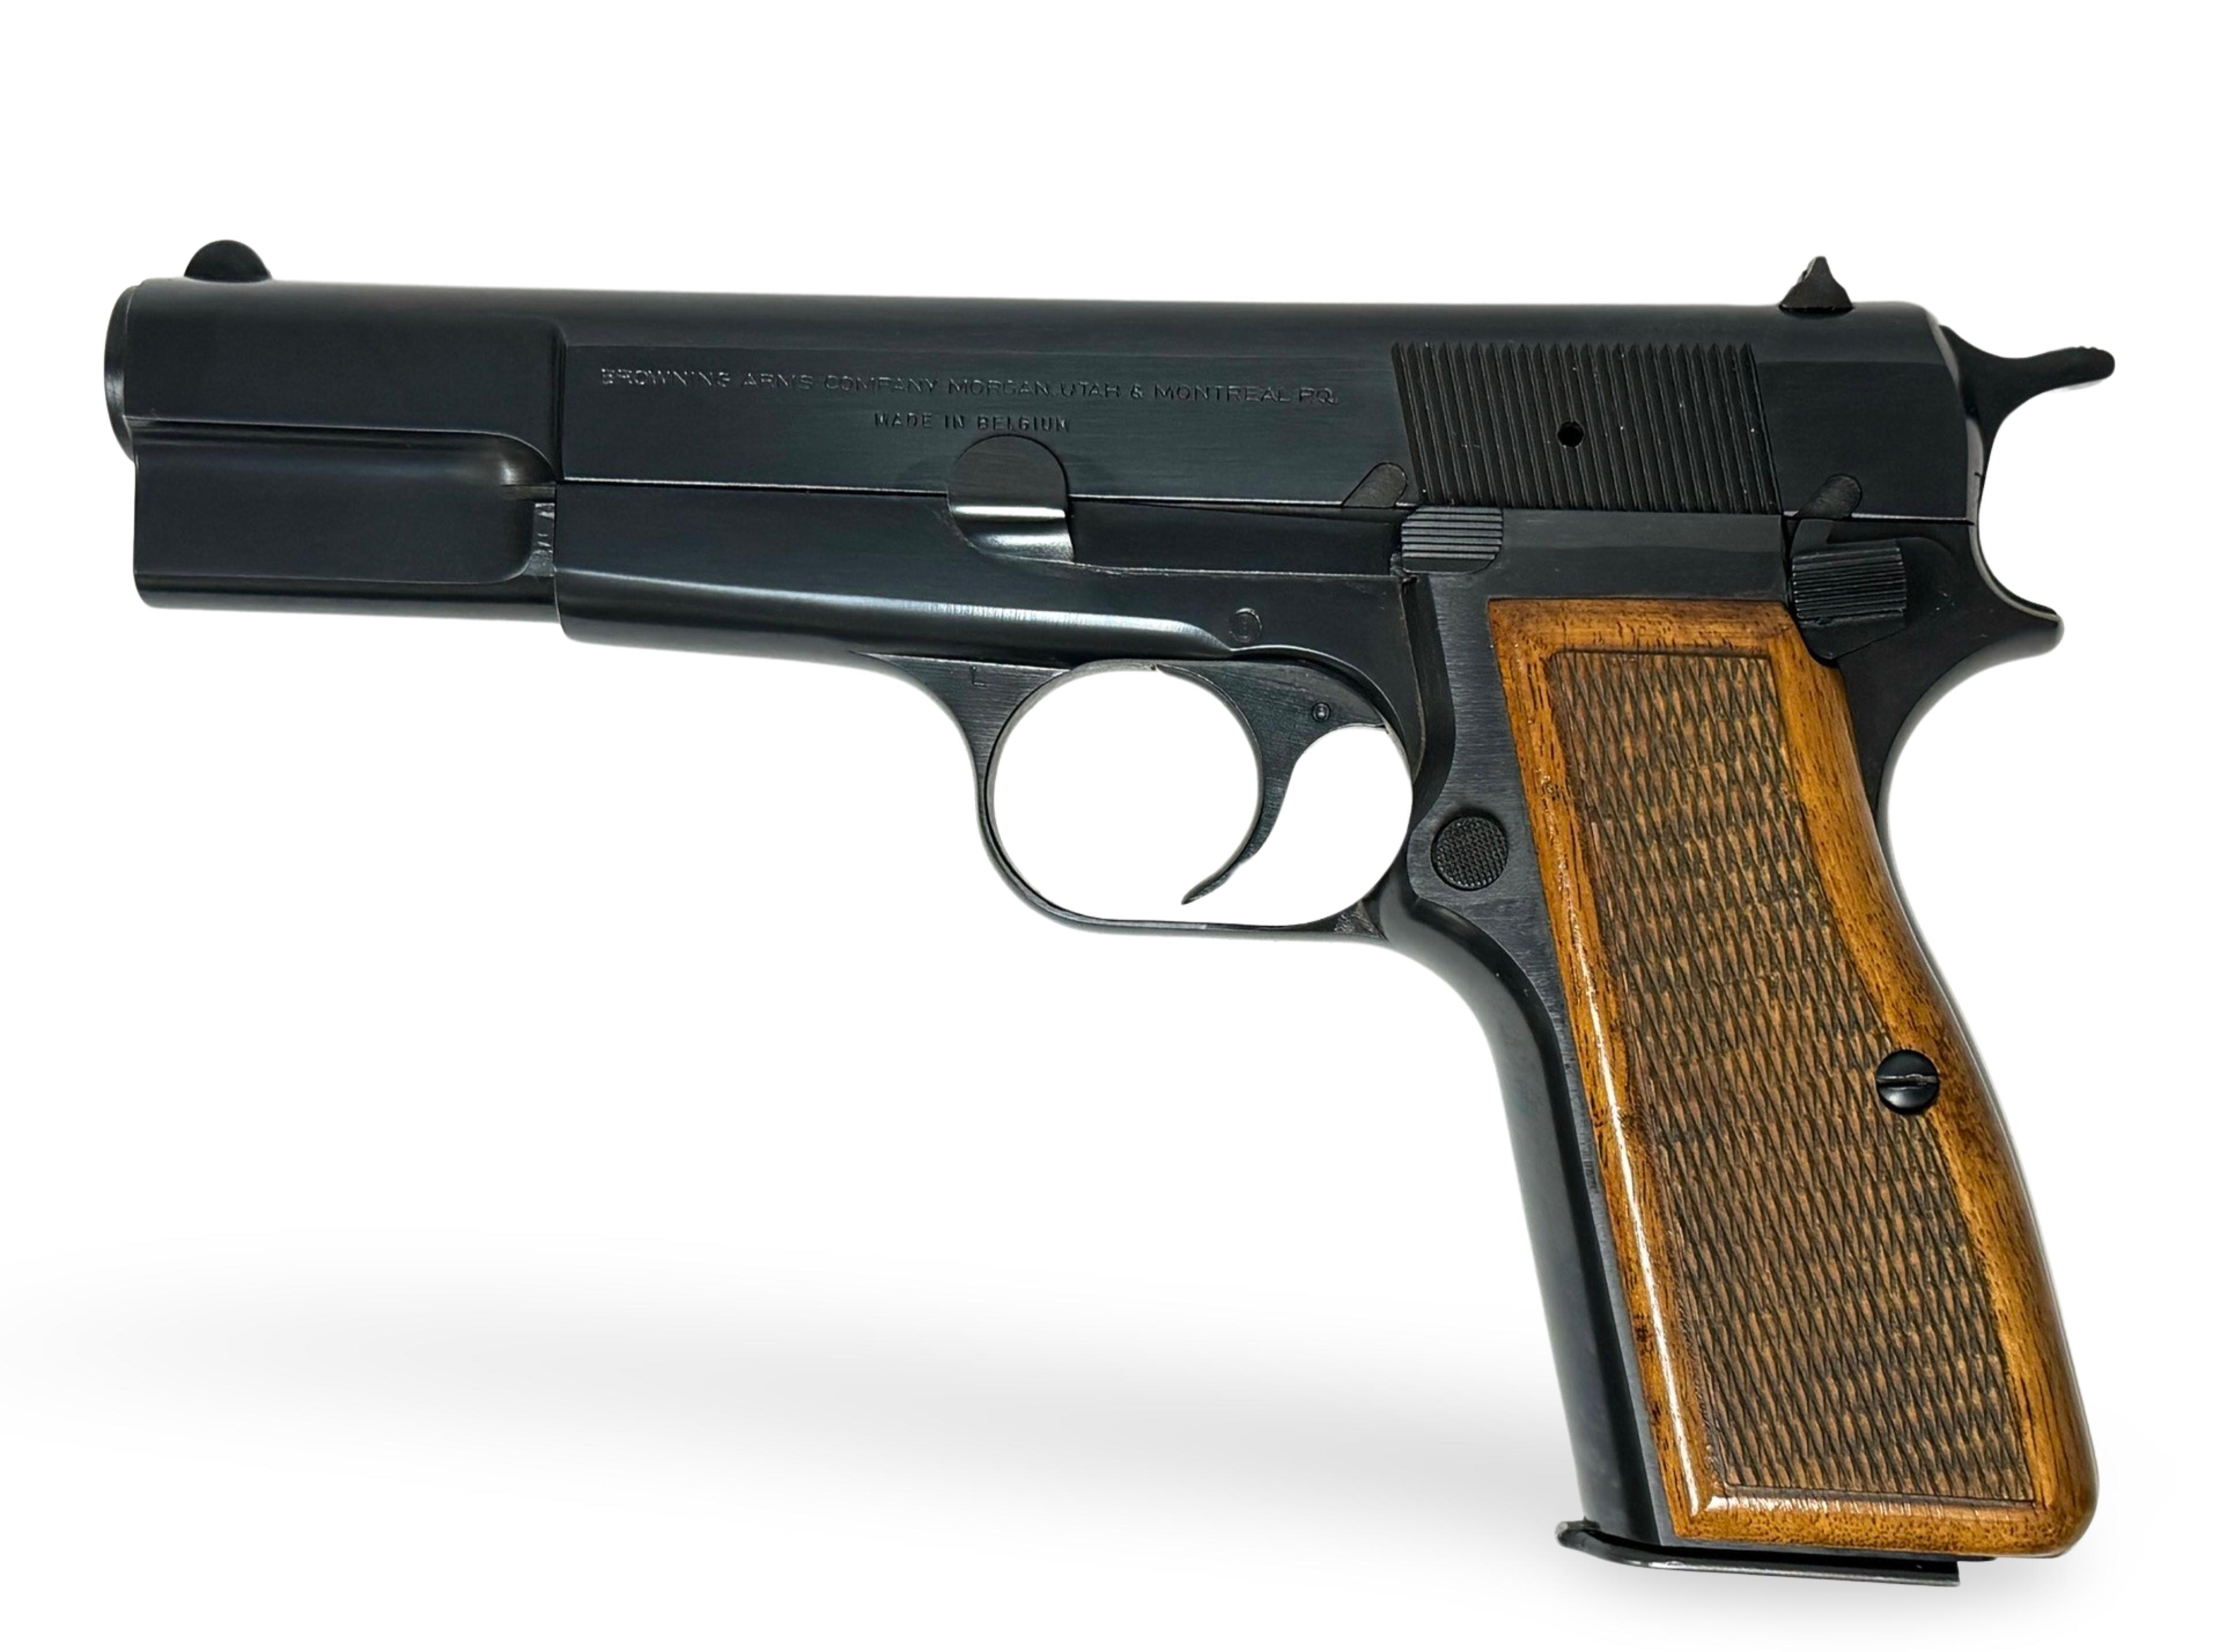 New 1977 Belgium FN Browning Hi Power 9MM Semi-Automatic Pistol in Factory Soft Case